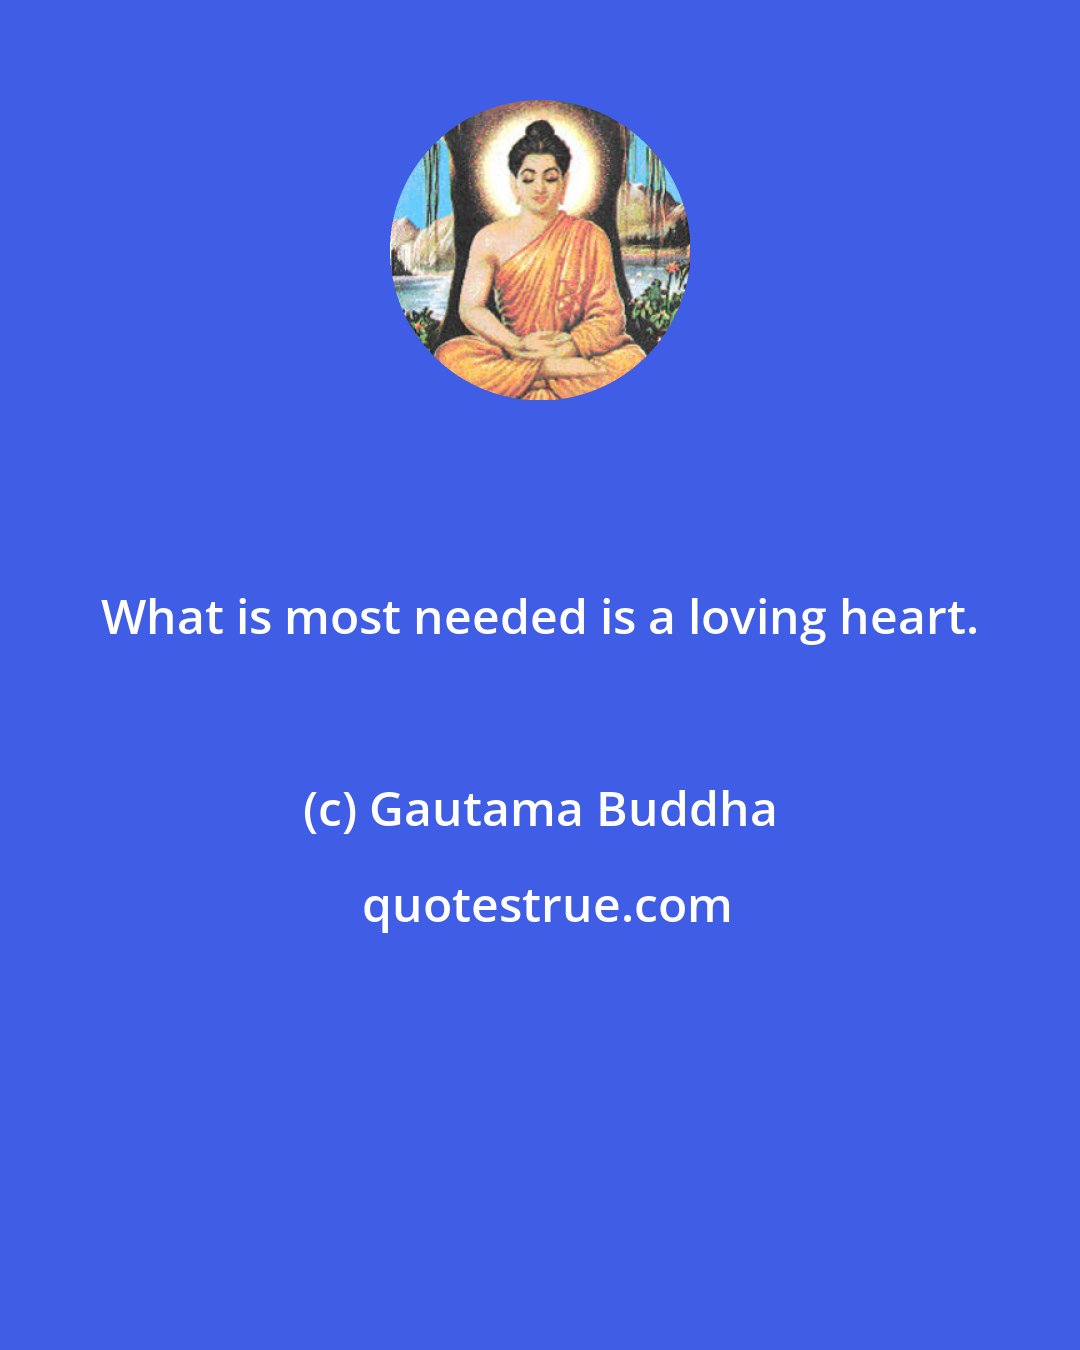 Gautama Buddha: What is most needed is a loving heart.